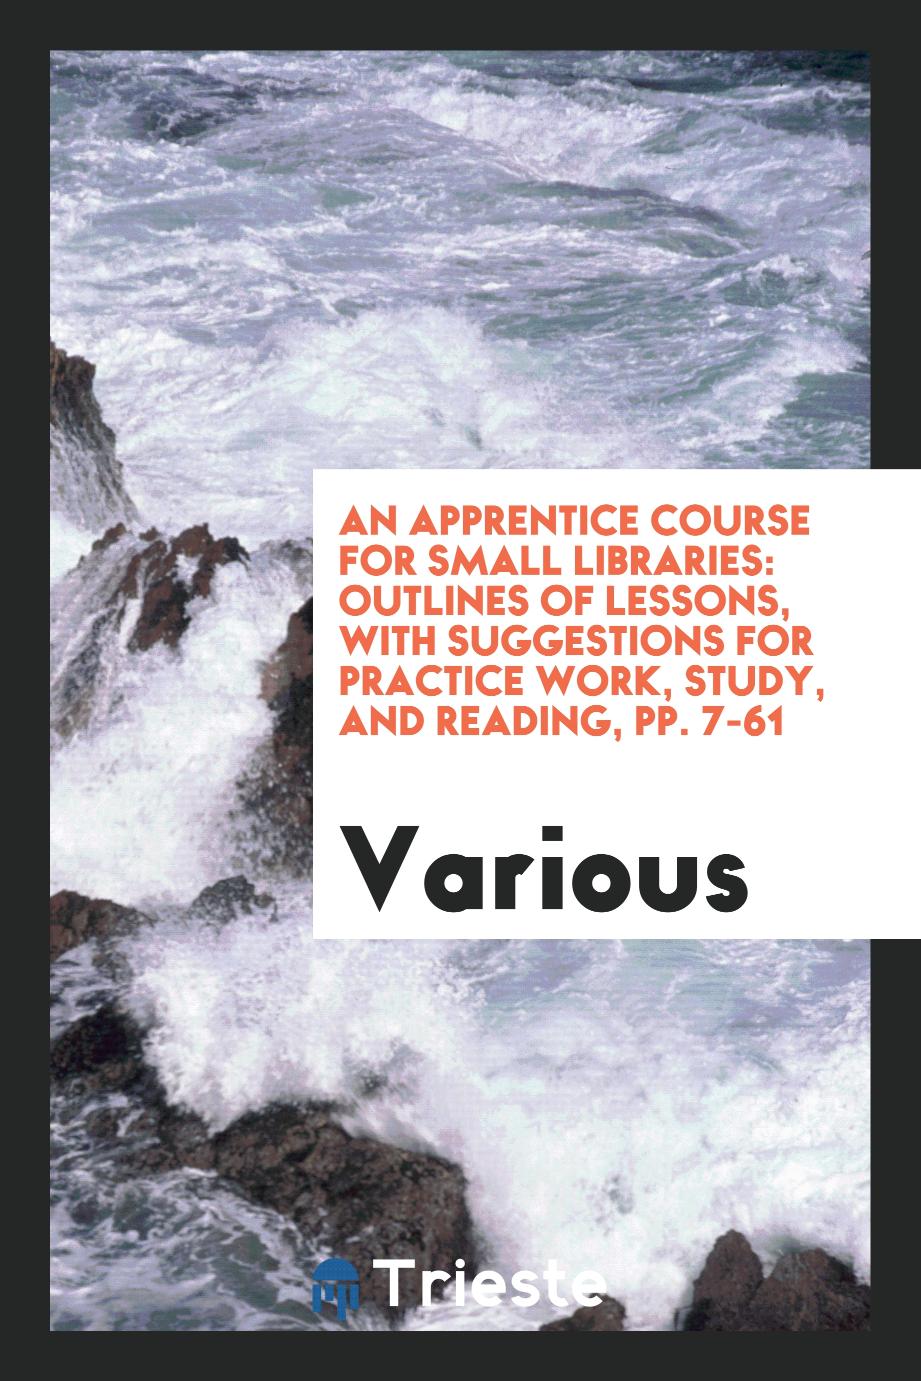 An Apprentice Course for Small Libraries: Outlines of Lessons, with Suggestions for Practice Work, Study, and Reading, pp. 7-61